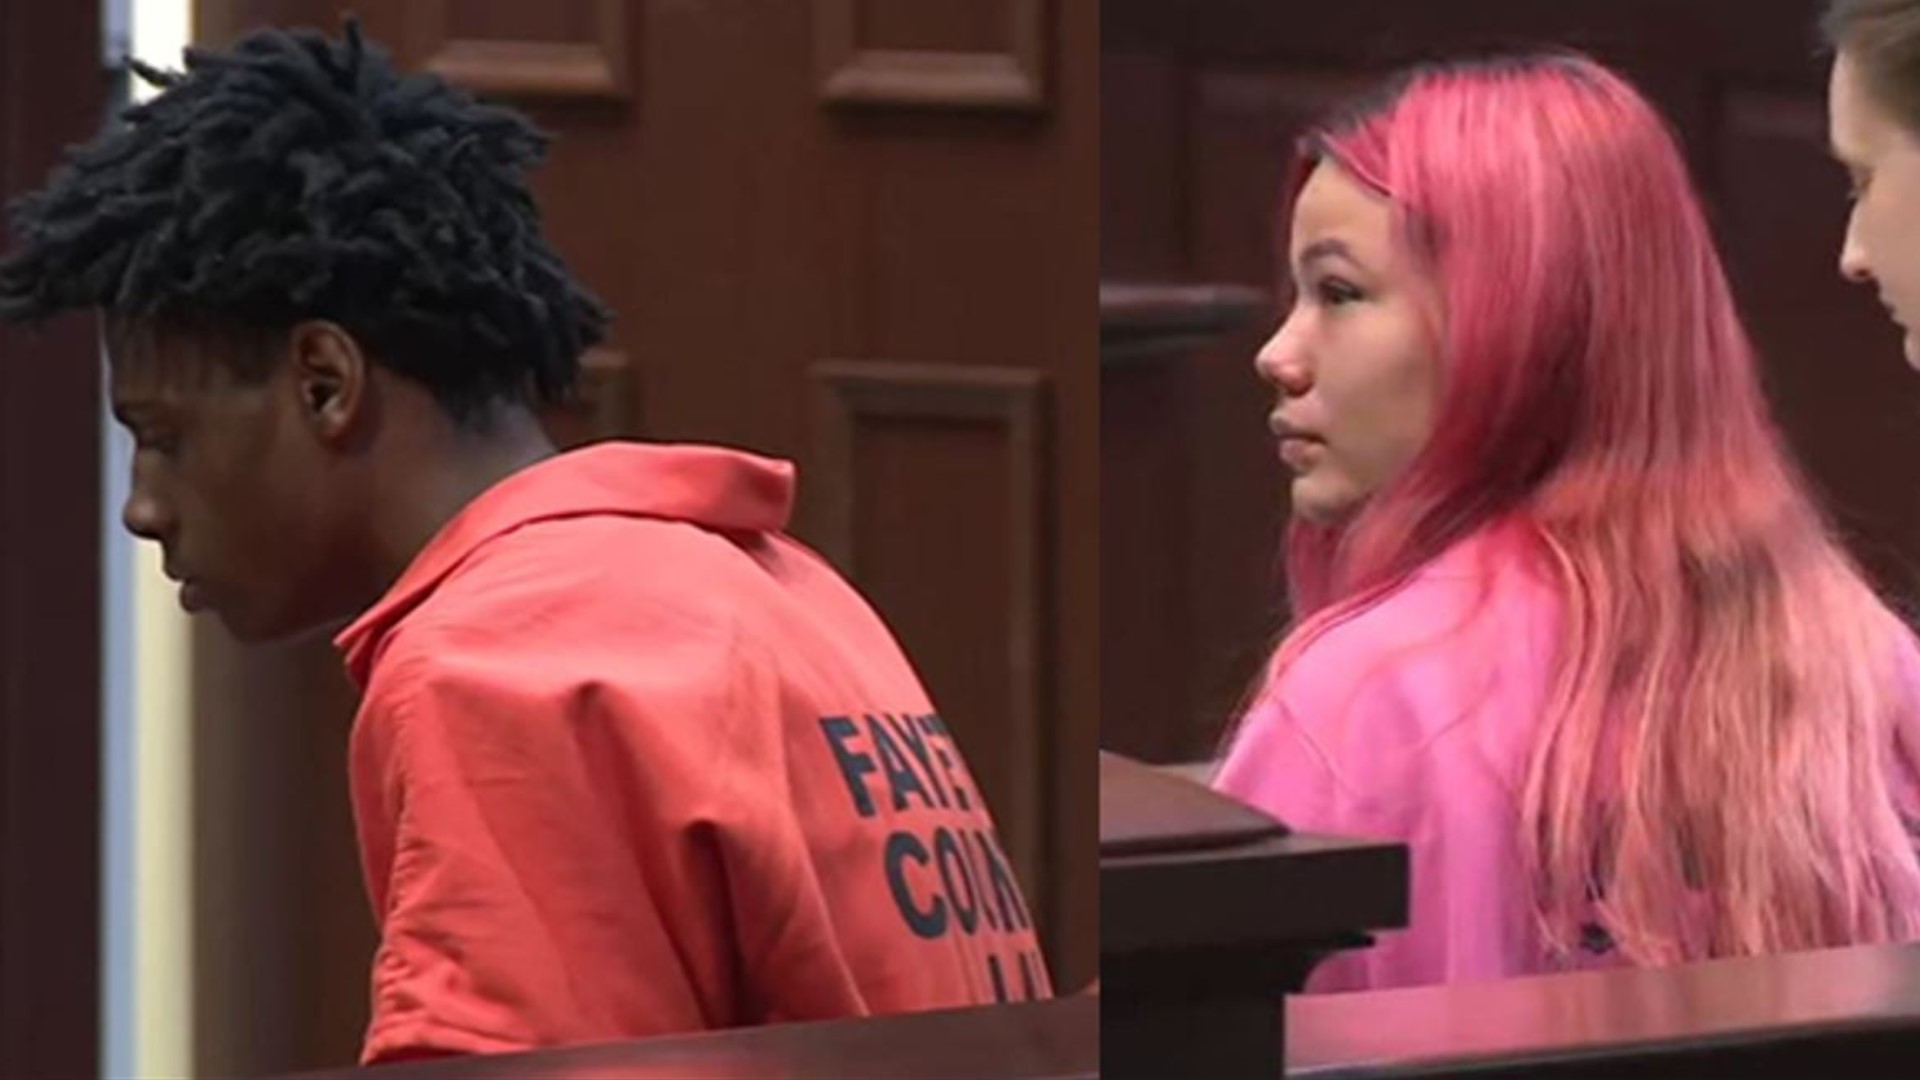 Adrian Jelks and Sandra Romero-Nunez both face murder charges in the case.